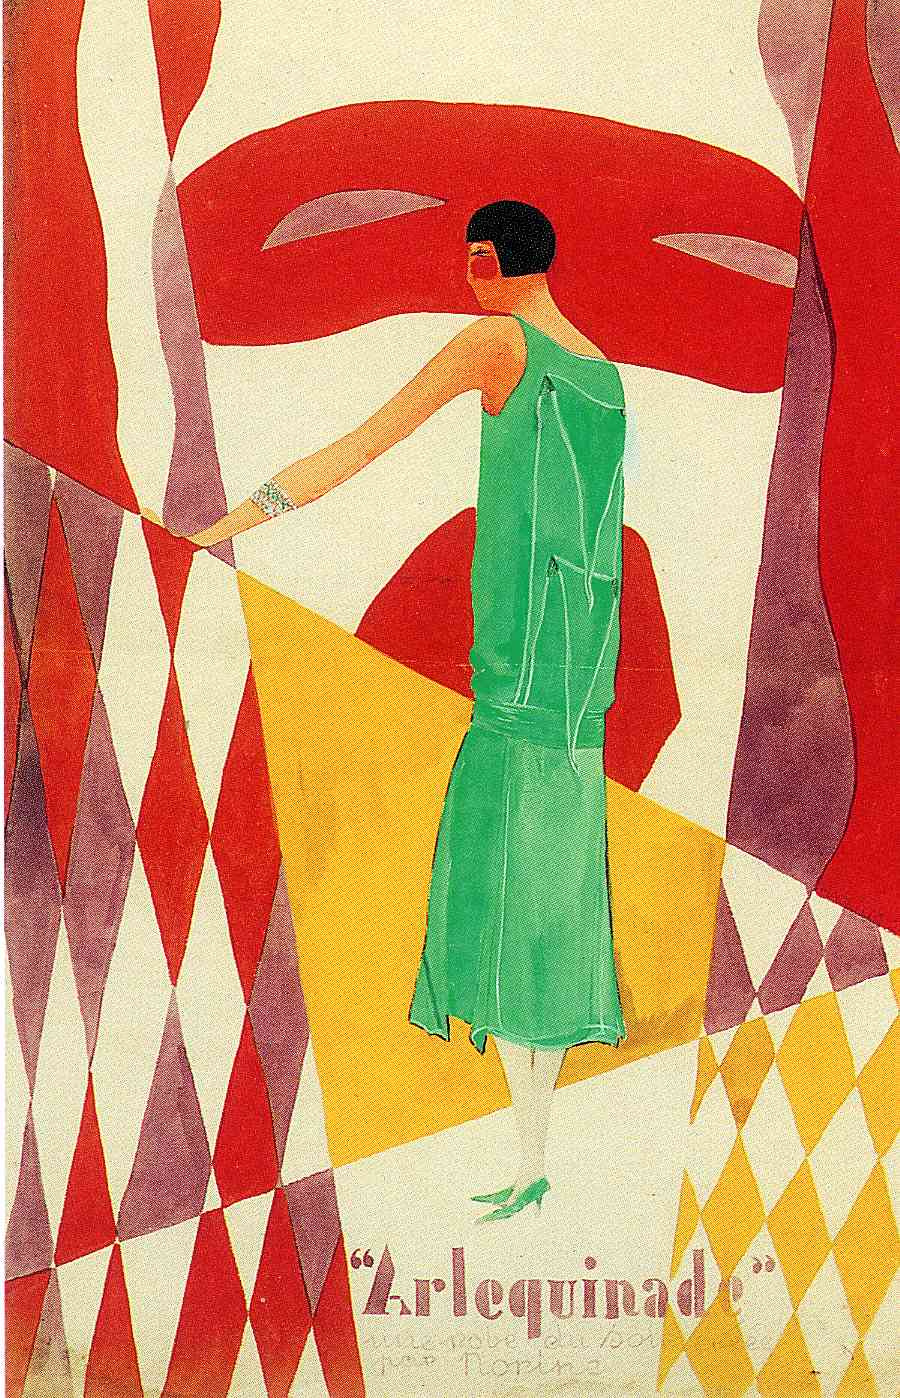 René Magritte. Promotional poster for the fashion house Norine